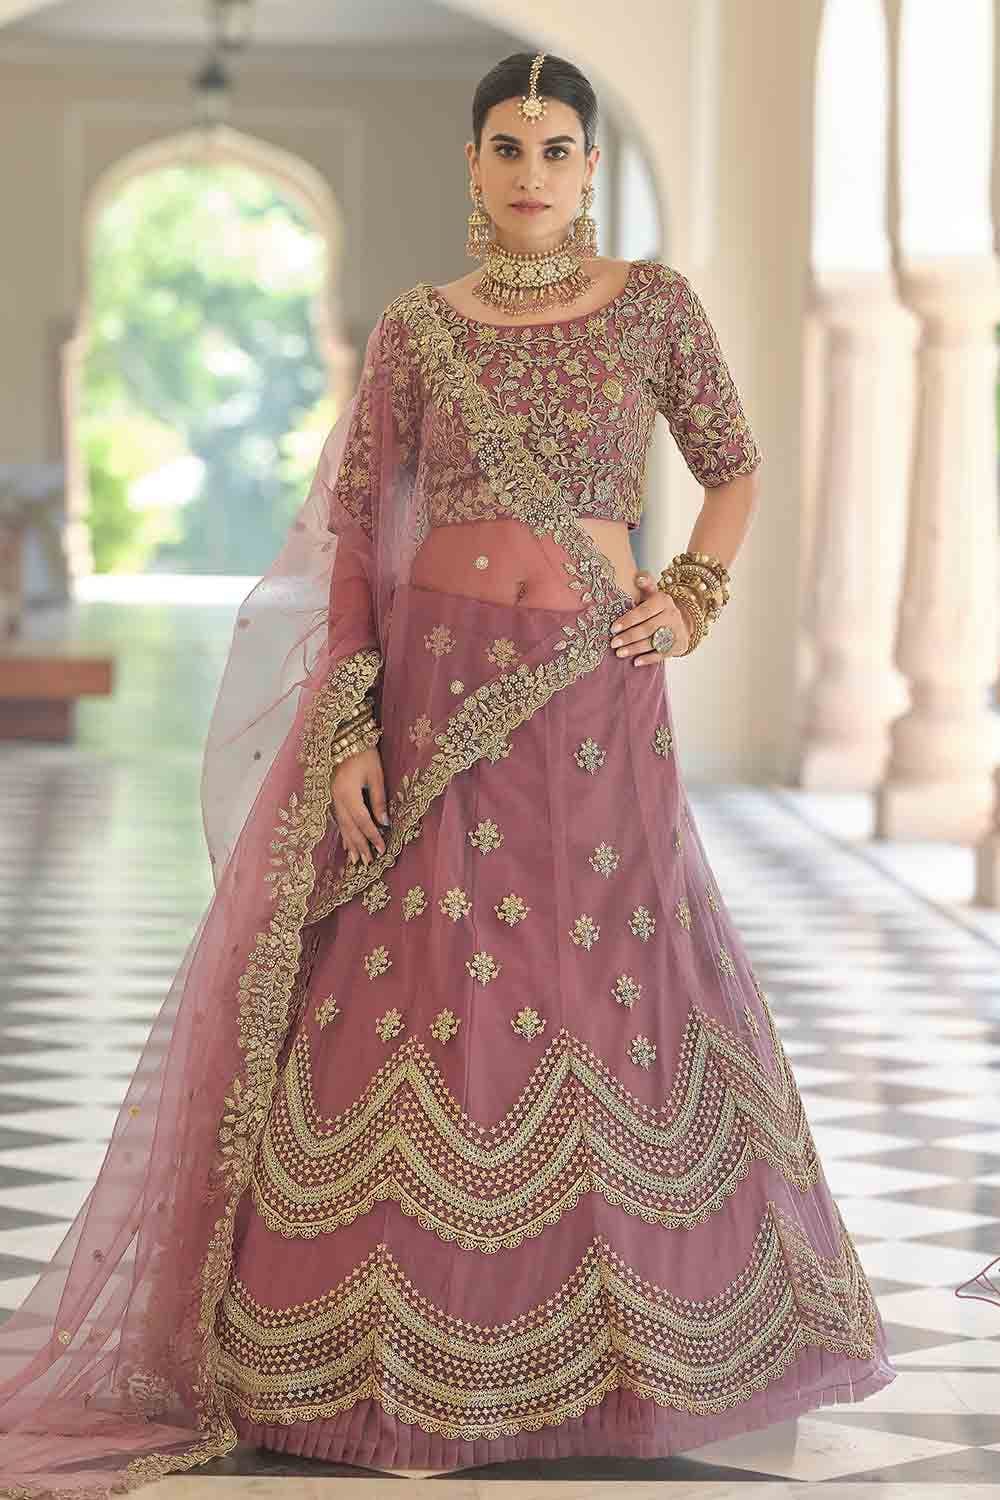 Lehenga Saree Online Shopping Tips And Quick Guide On Where To Get This  Outfit; Your Wedding Woes Sorted!